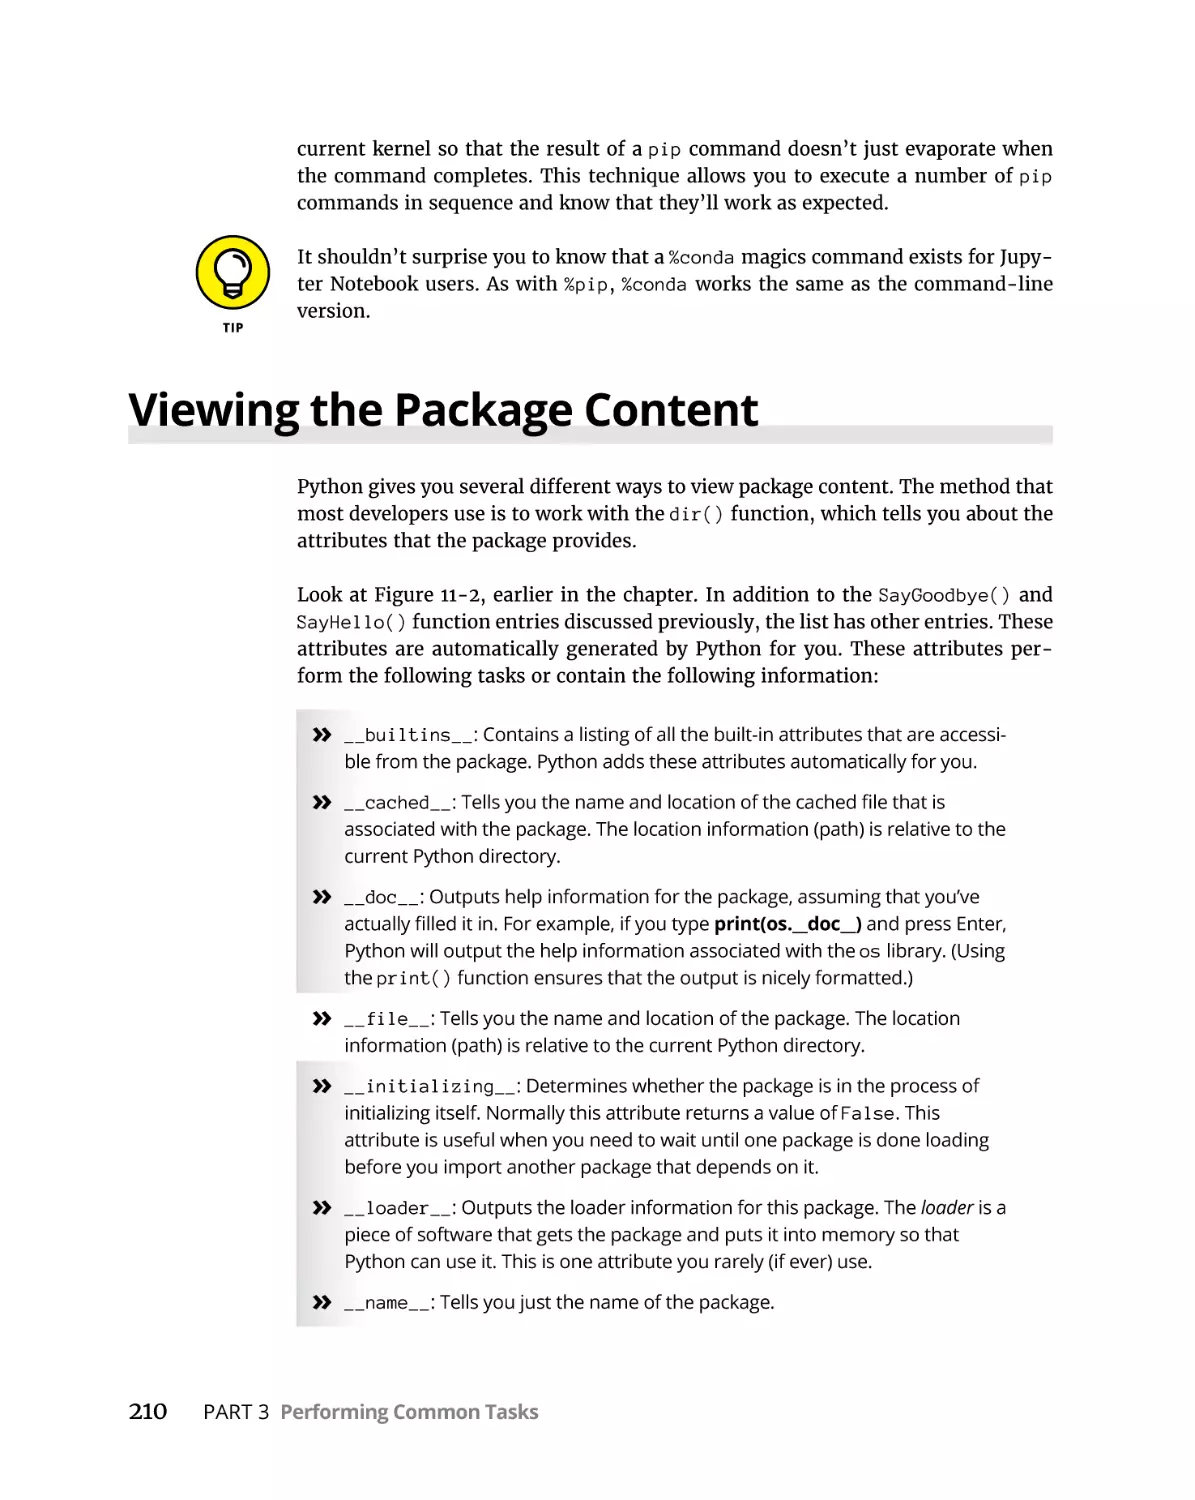 Viewing the Package Content